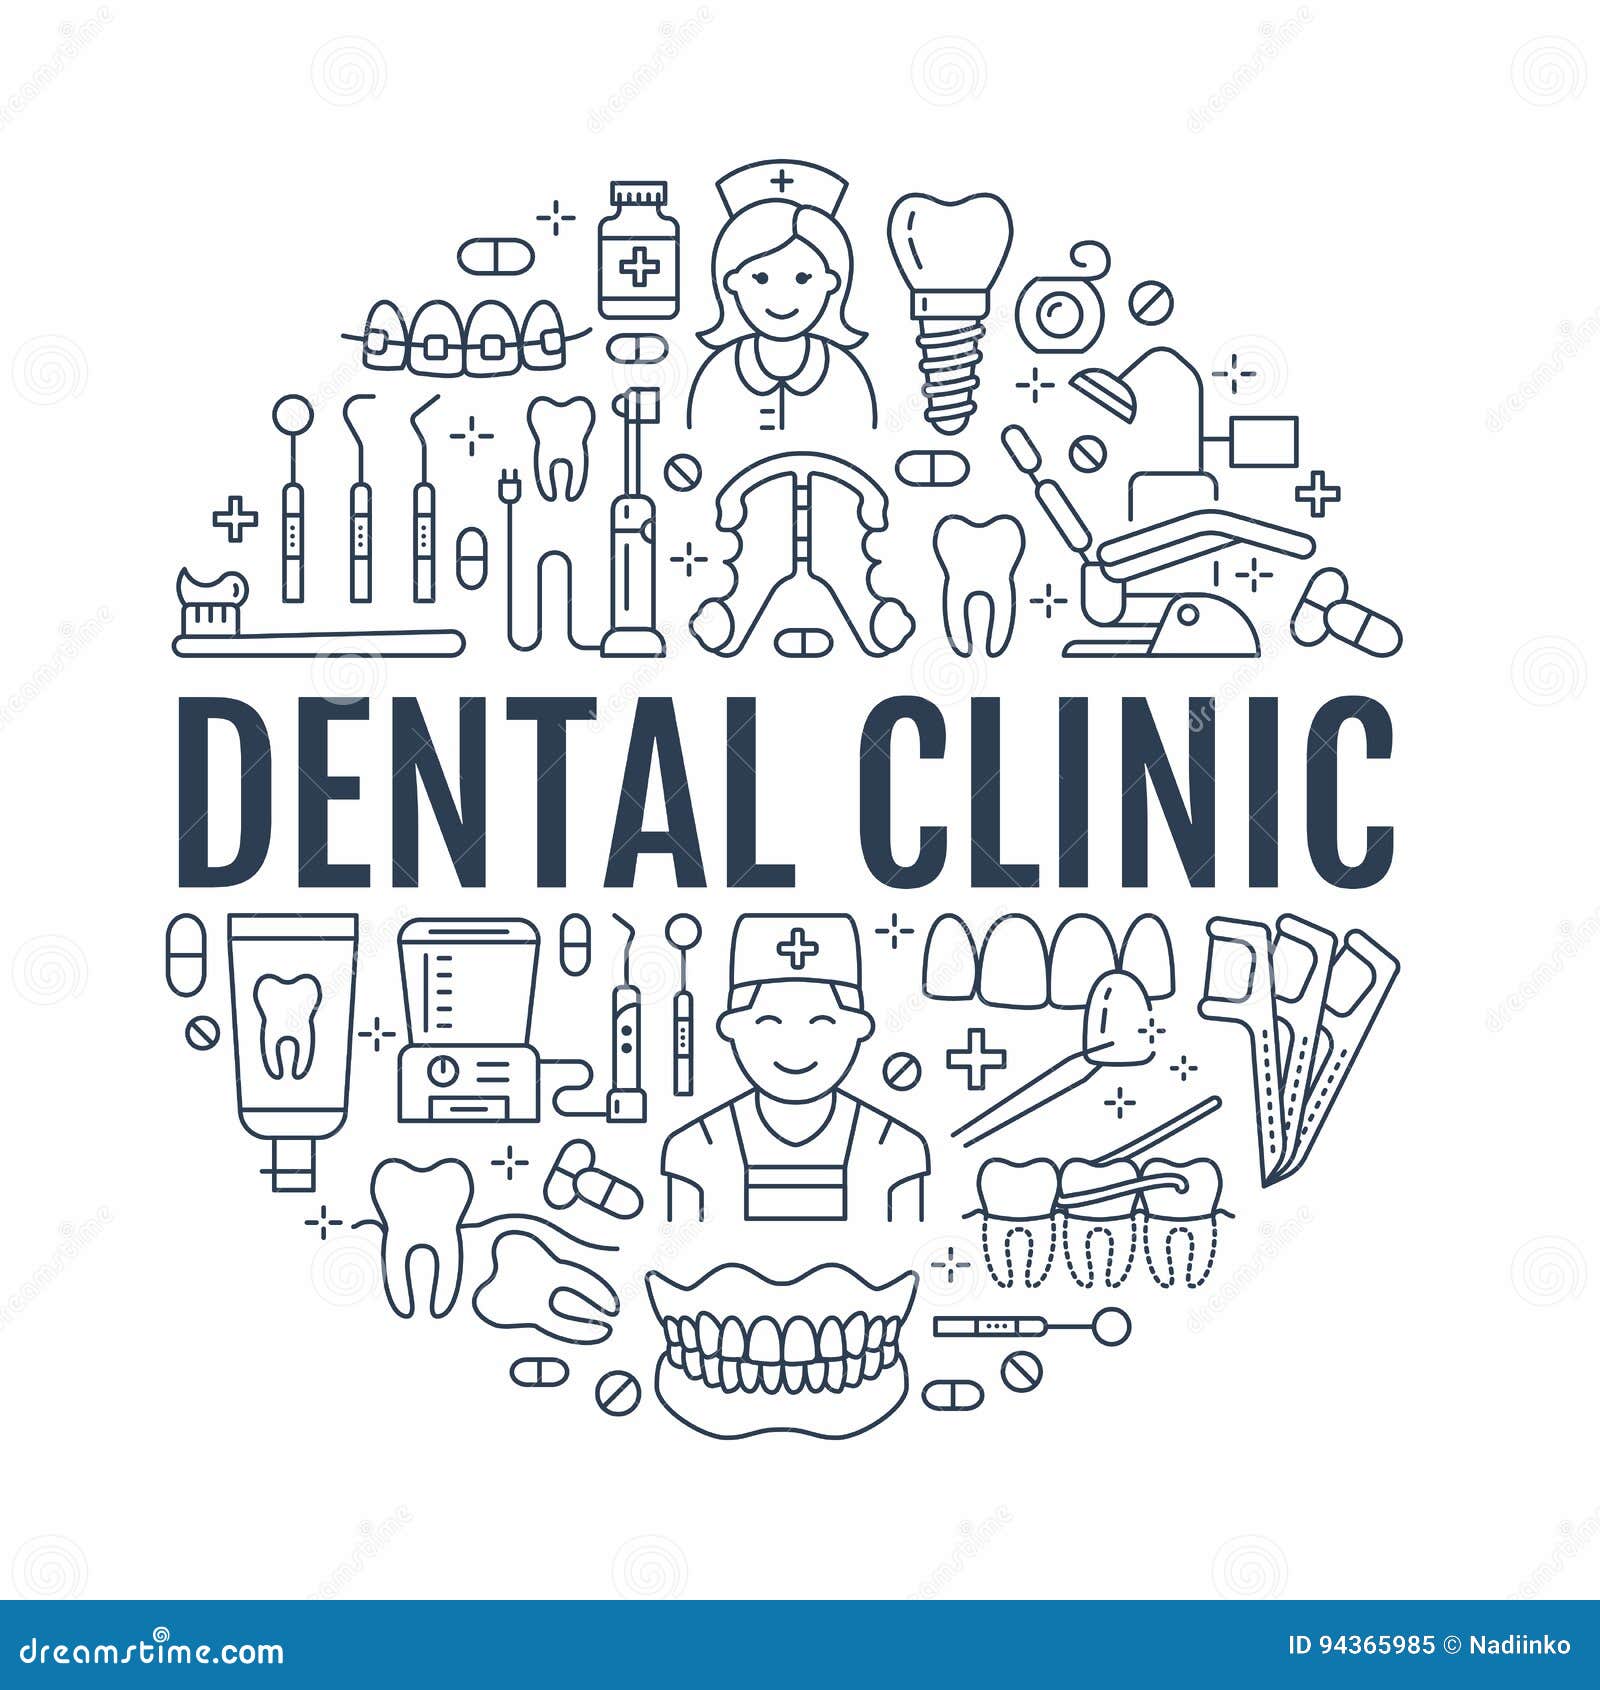 dentist, orthodontics medical banner with  line icon of dental care equipment, braces, tooth prosthesis, veneers